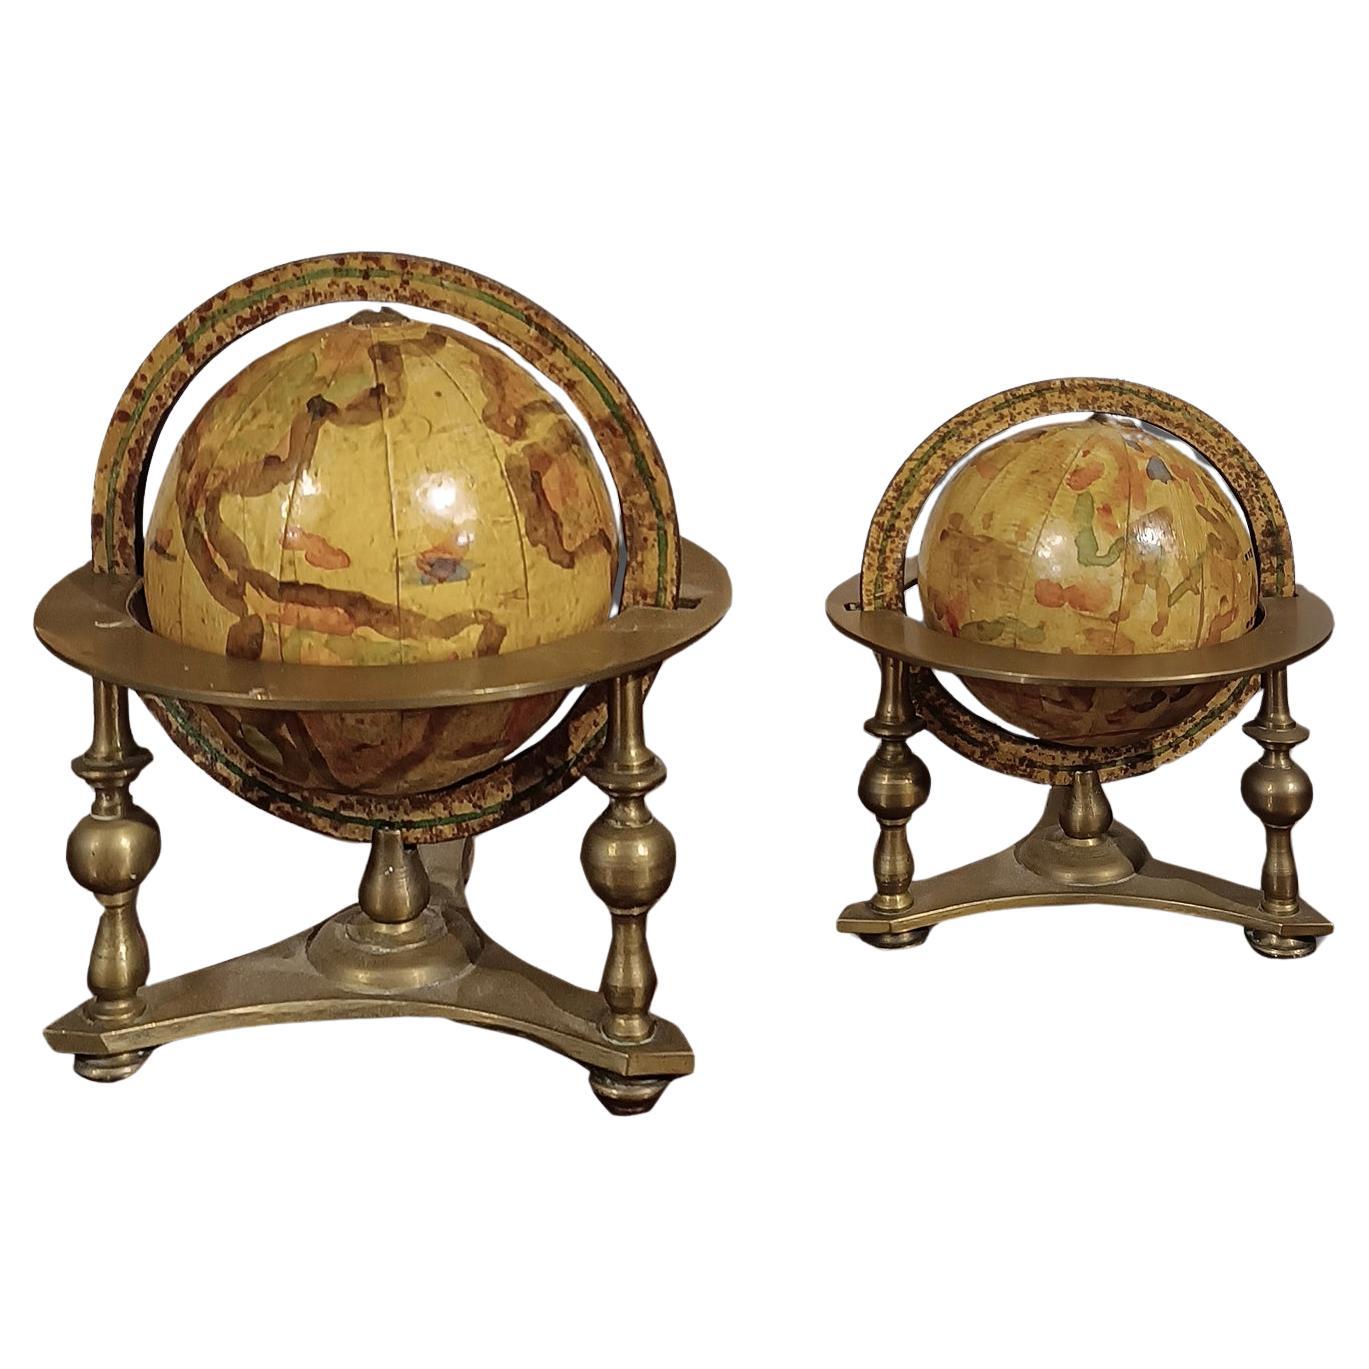 19th CENTURY PAIR OF SMALL WORLD GLOBES For Sale